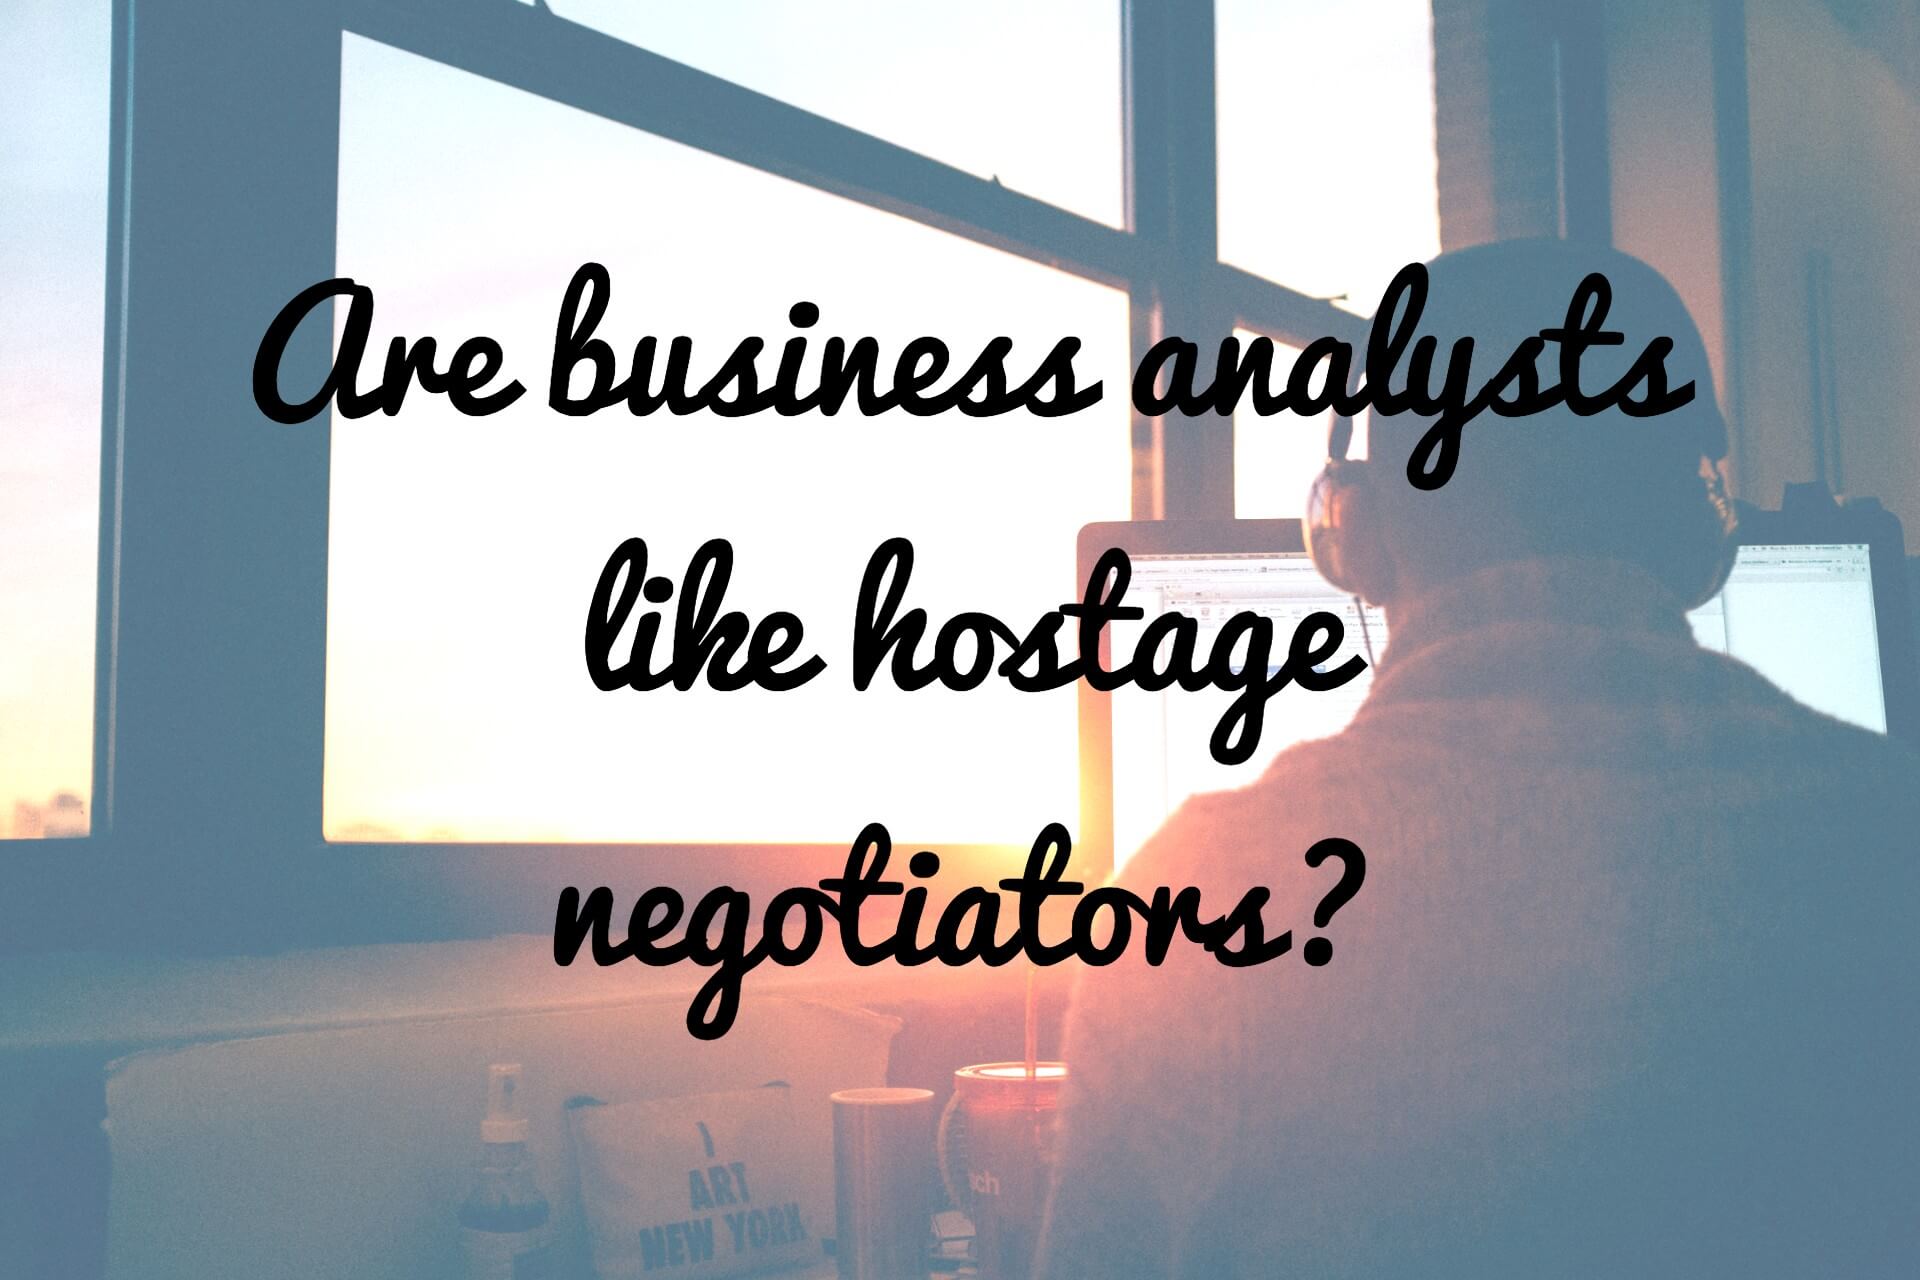 The (Hostage) Negotiator: What Can We Learn From Software Business Analysts?